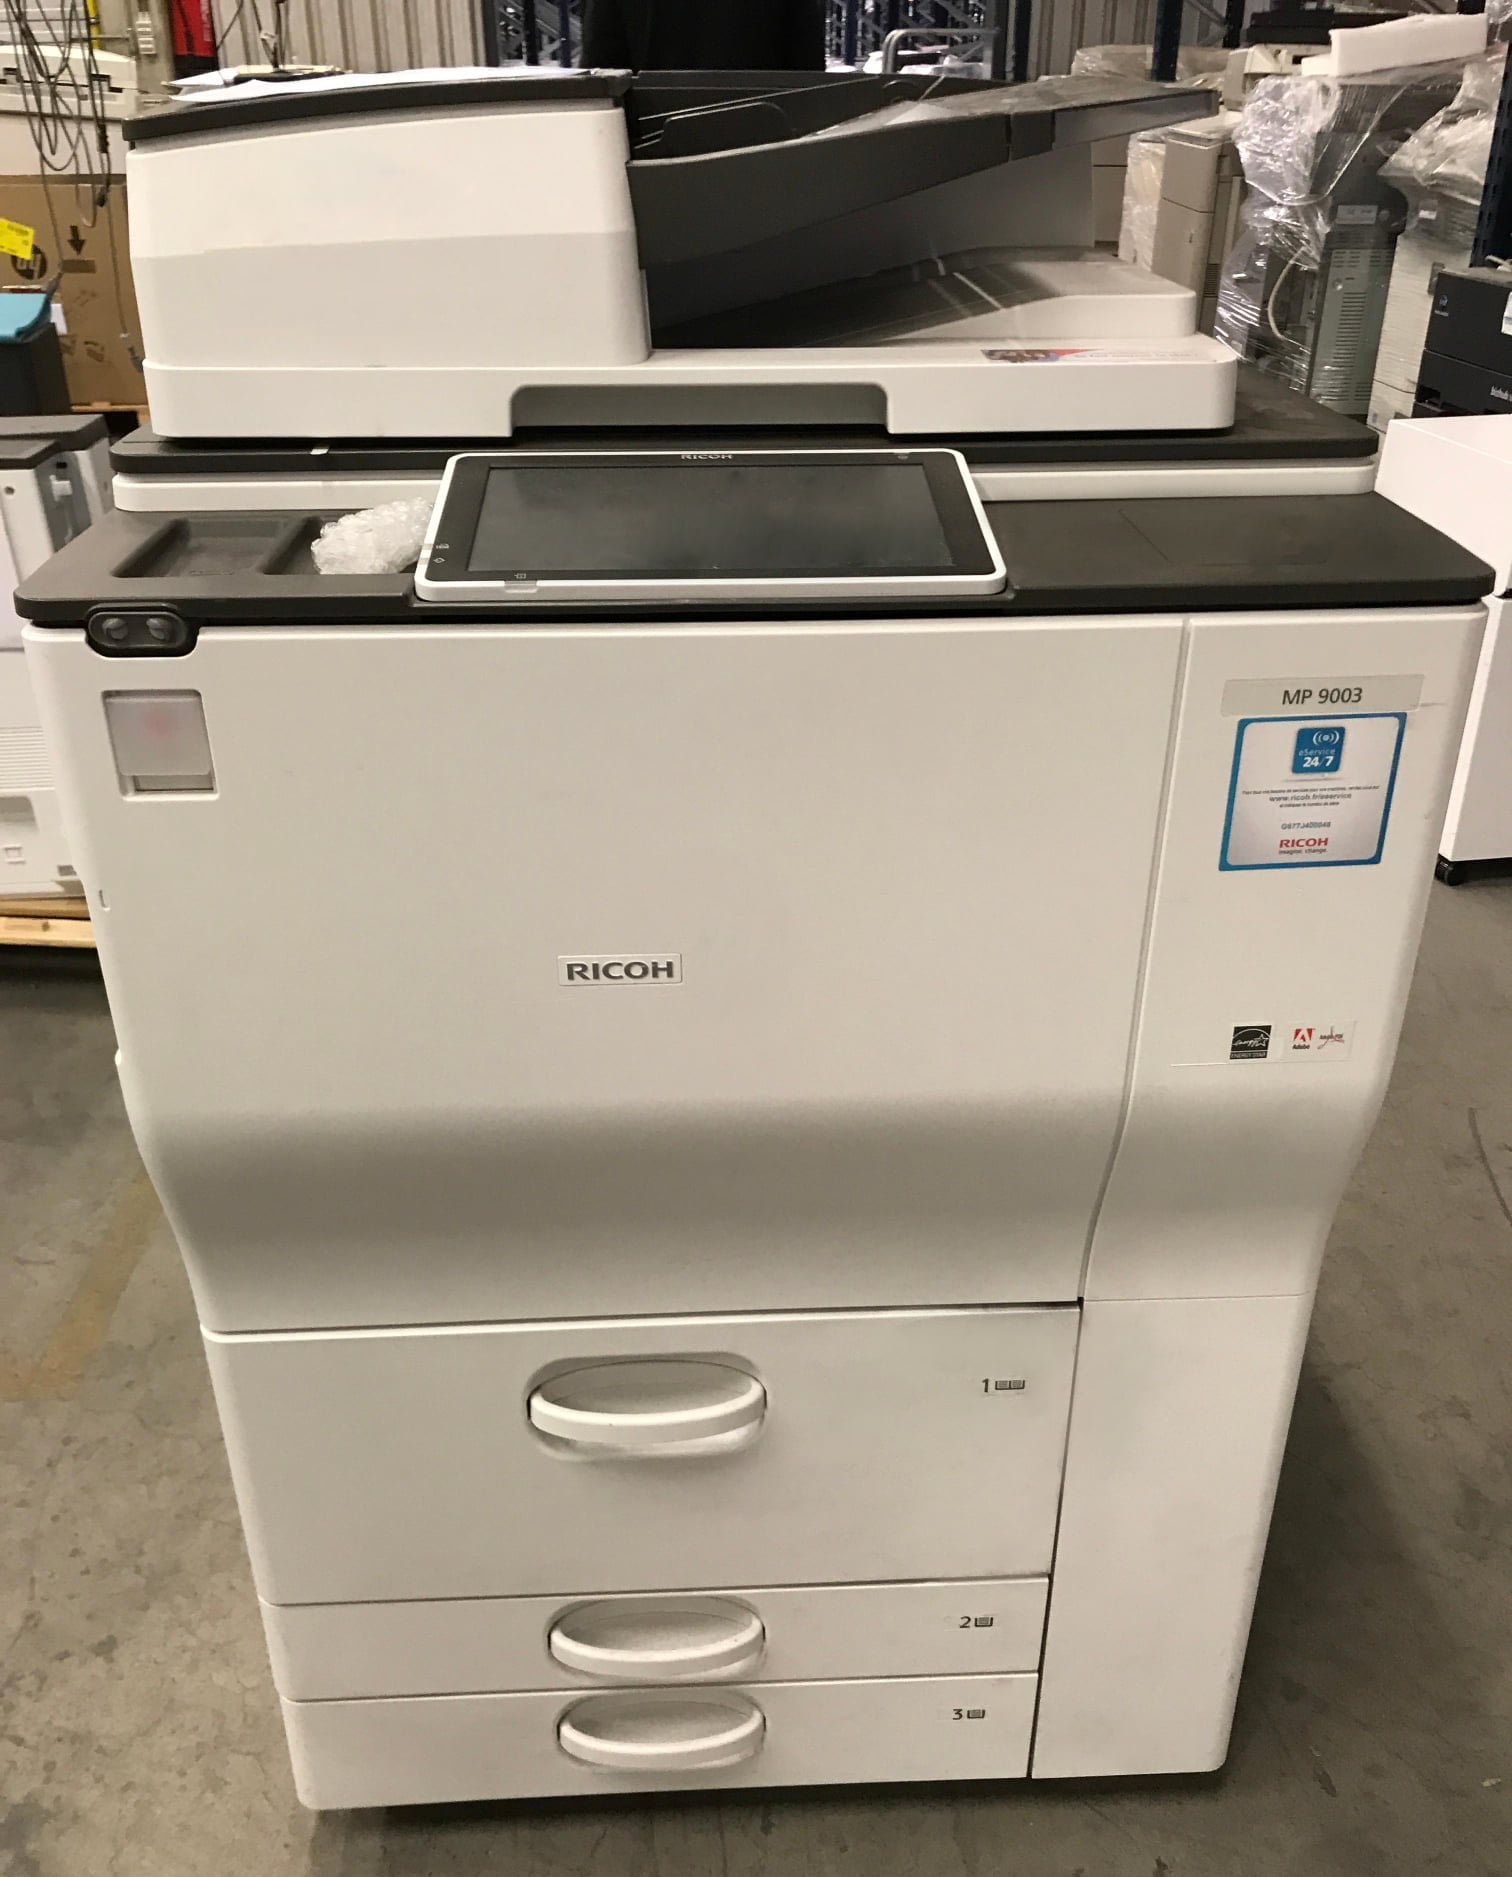 Refurbished Ricoh Aficio MP 9003 A3/A4 Monochrome Laser Multifunction Printer - 90ppm, Print, Scan, Copy, Auto Duplexing, Network, 2 Trays, High Capacity Tandem Tray